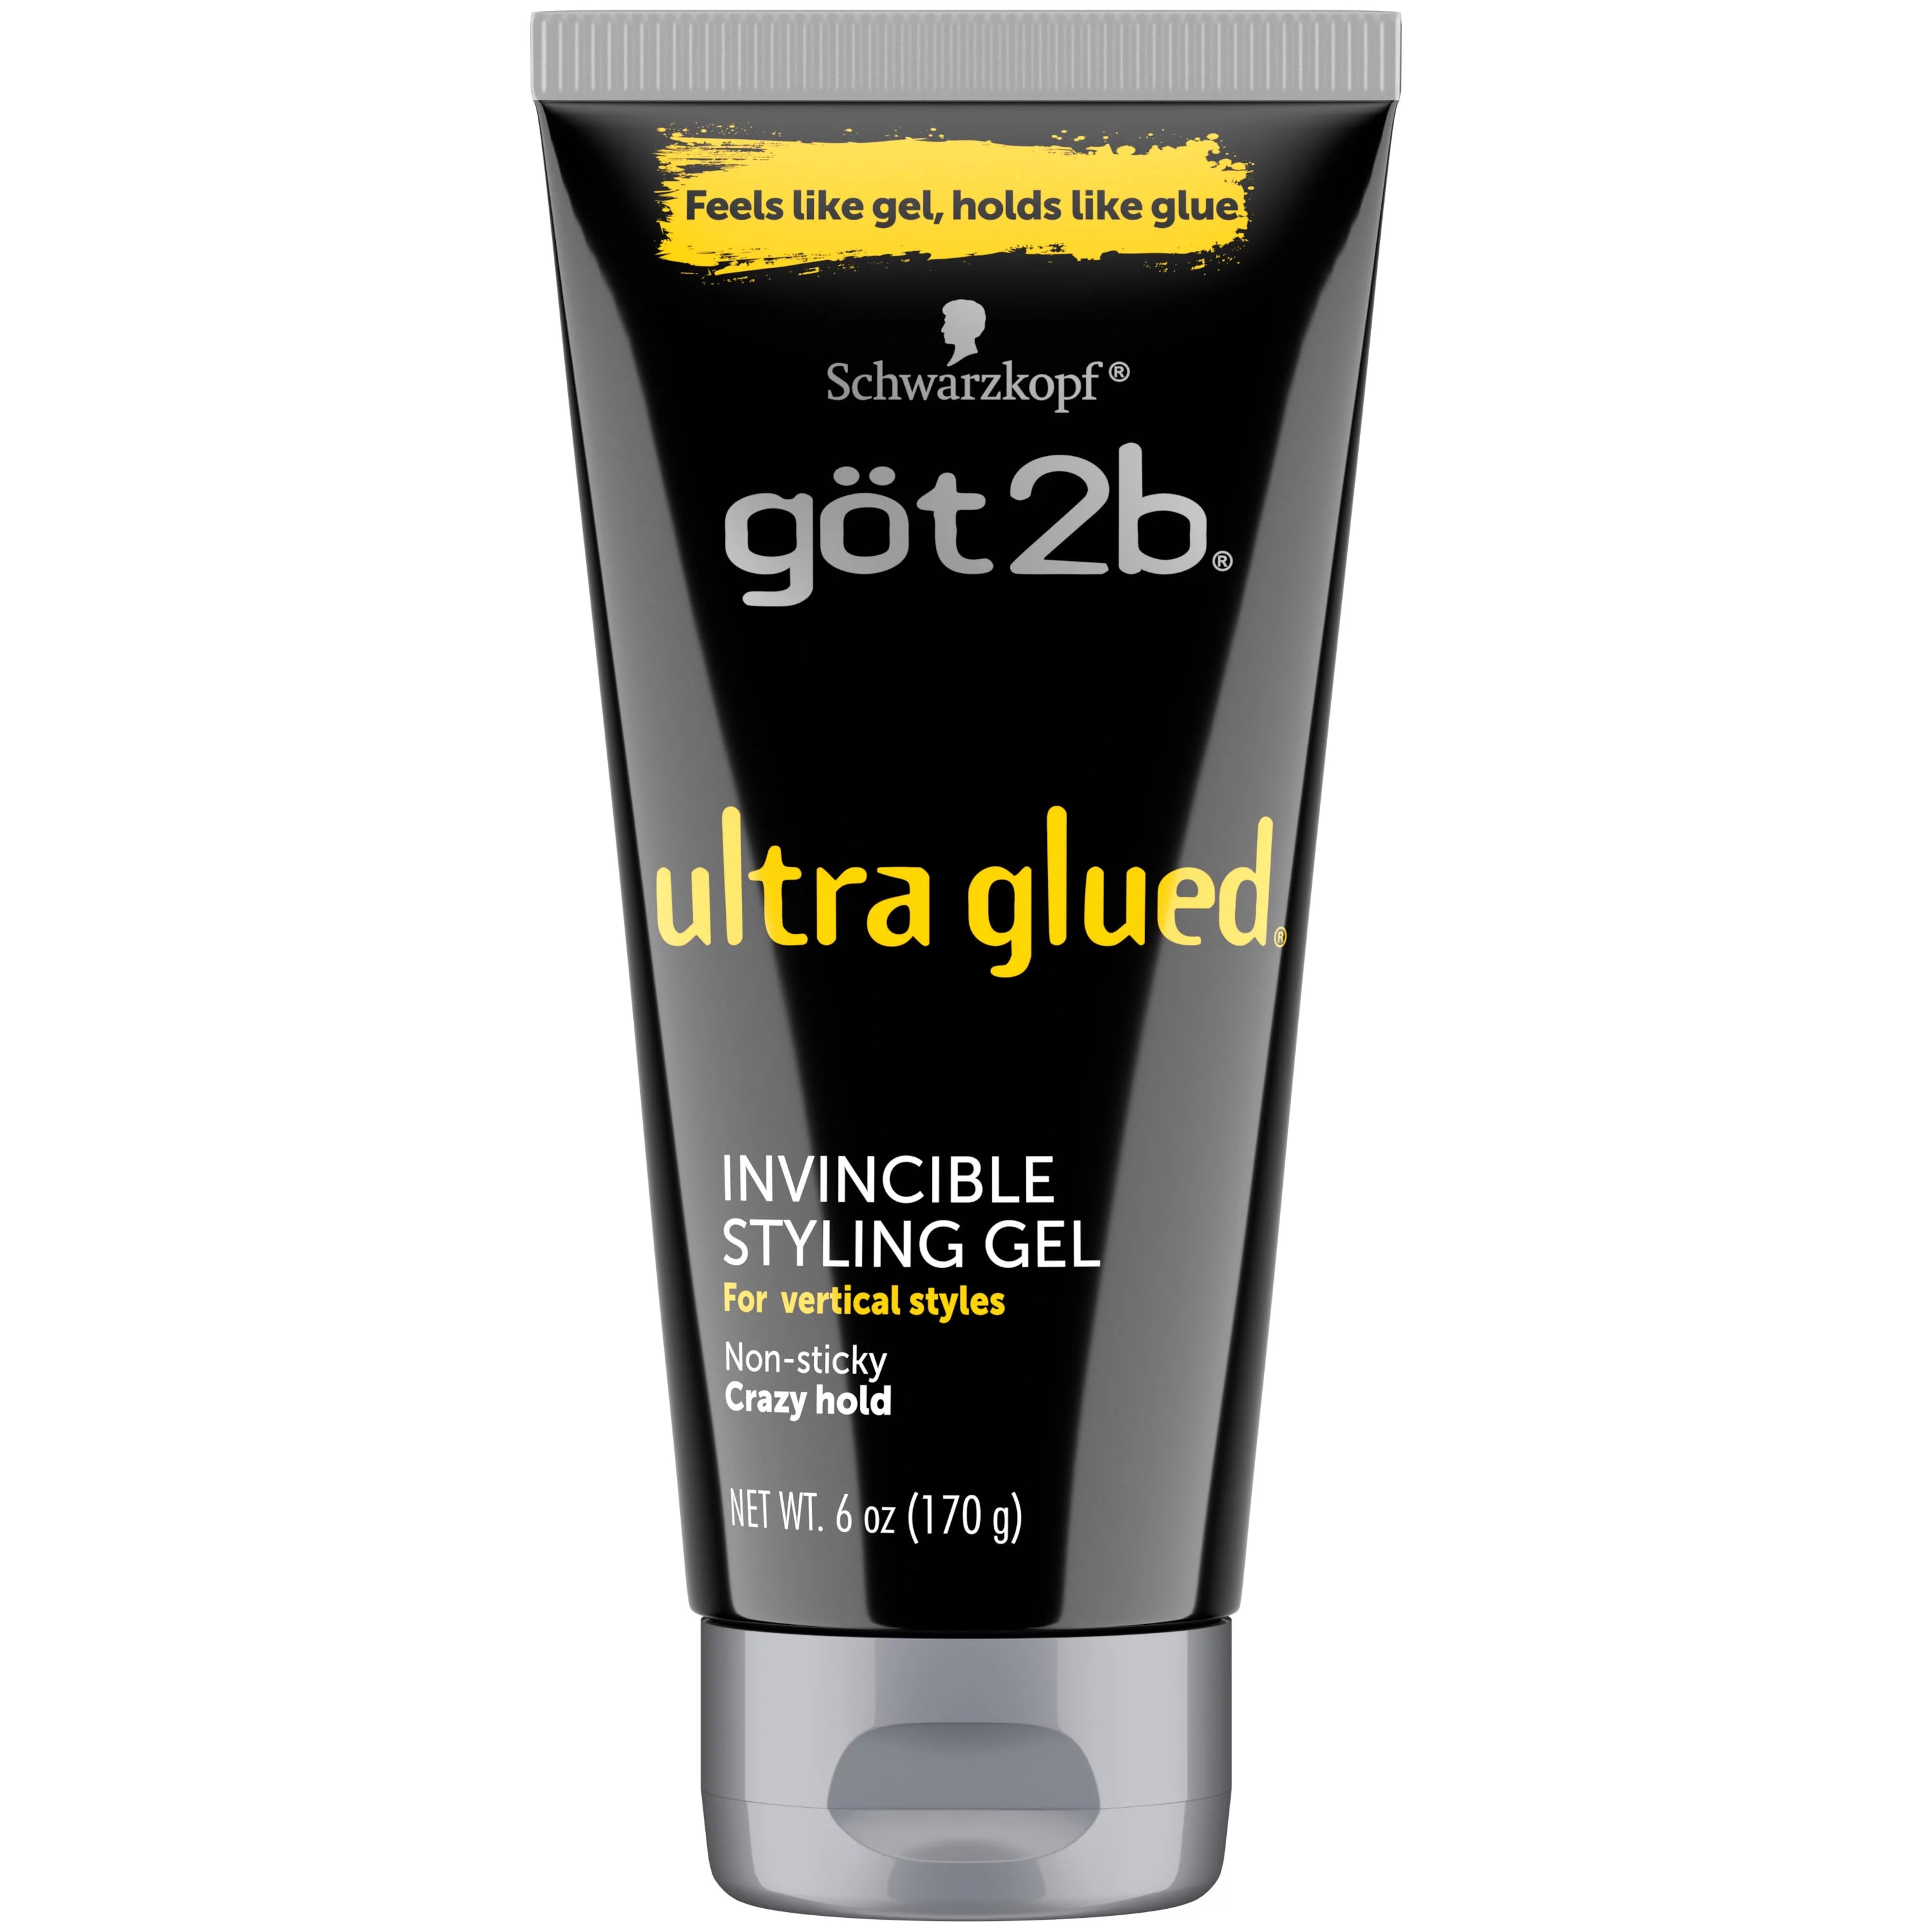 GOT2B ULTRA GLUED INVINCIBLE STYLING GEL- FOR VERTICAL STYLES